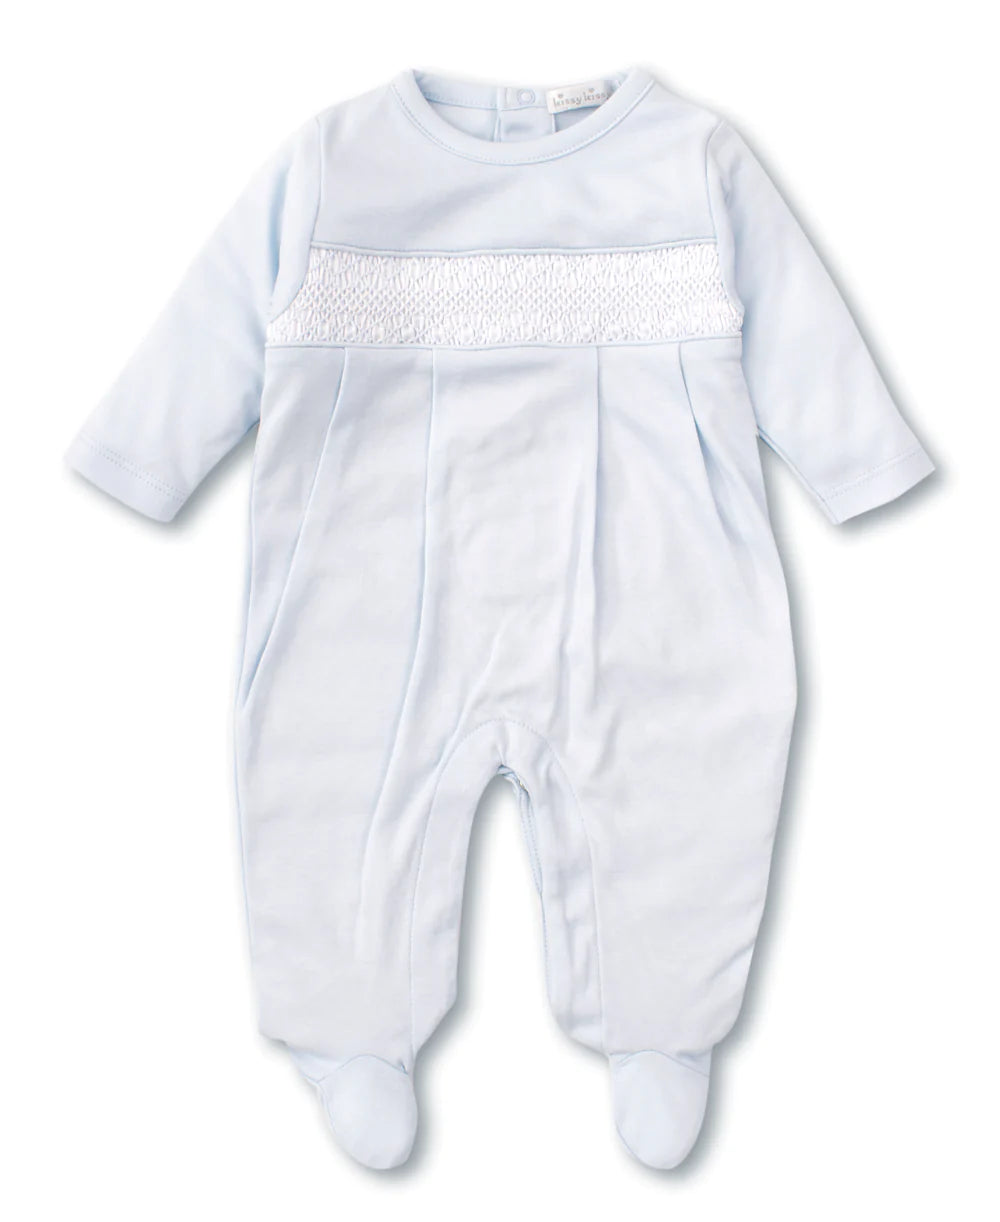 CHARMED HAND SMOCKED BLUE FOOTIE